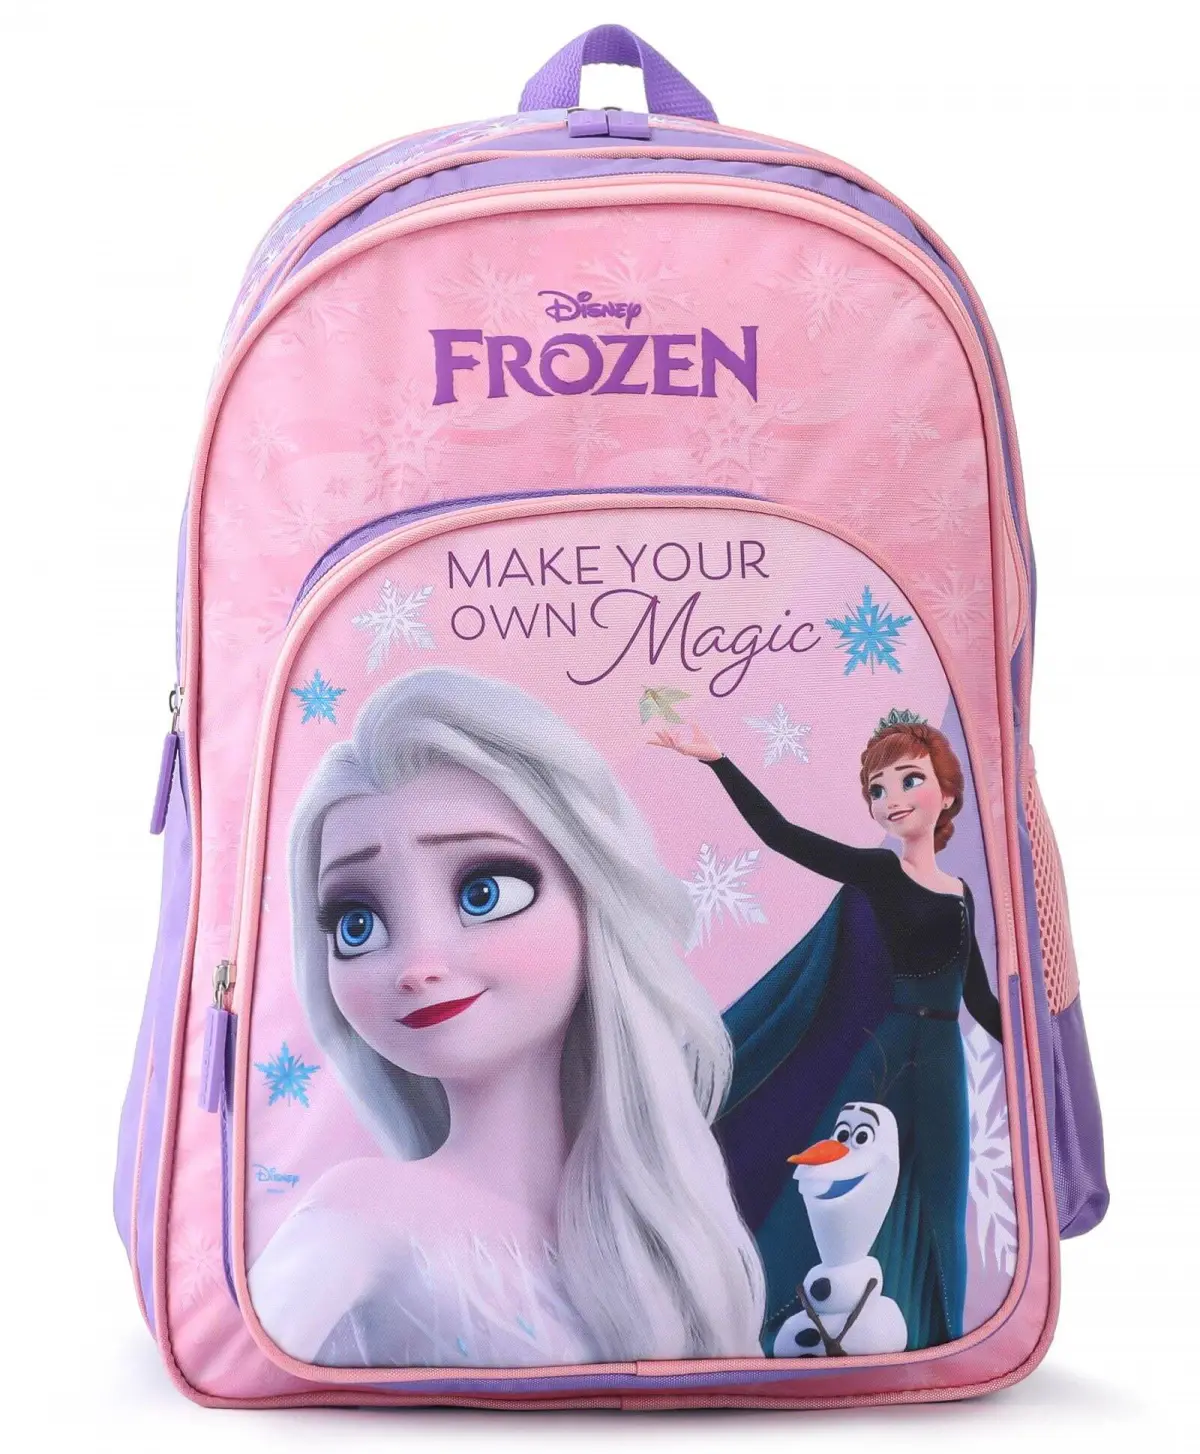 Striders 16 inches Frozen-Inspired School Bag for Winter Wonderland Adventures Multicolor For Kids Ages 6Y+